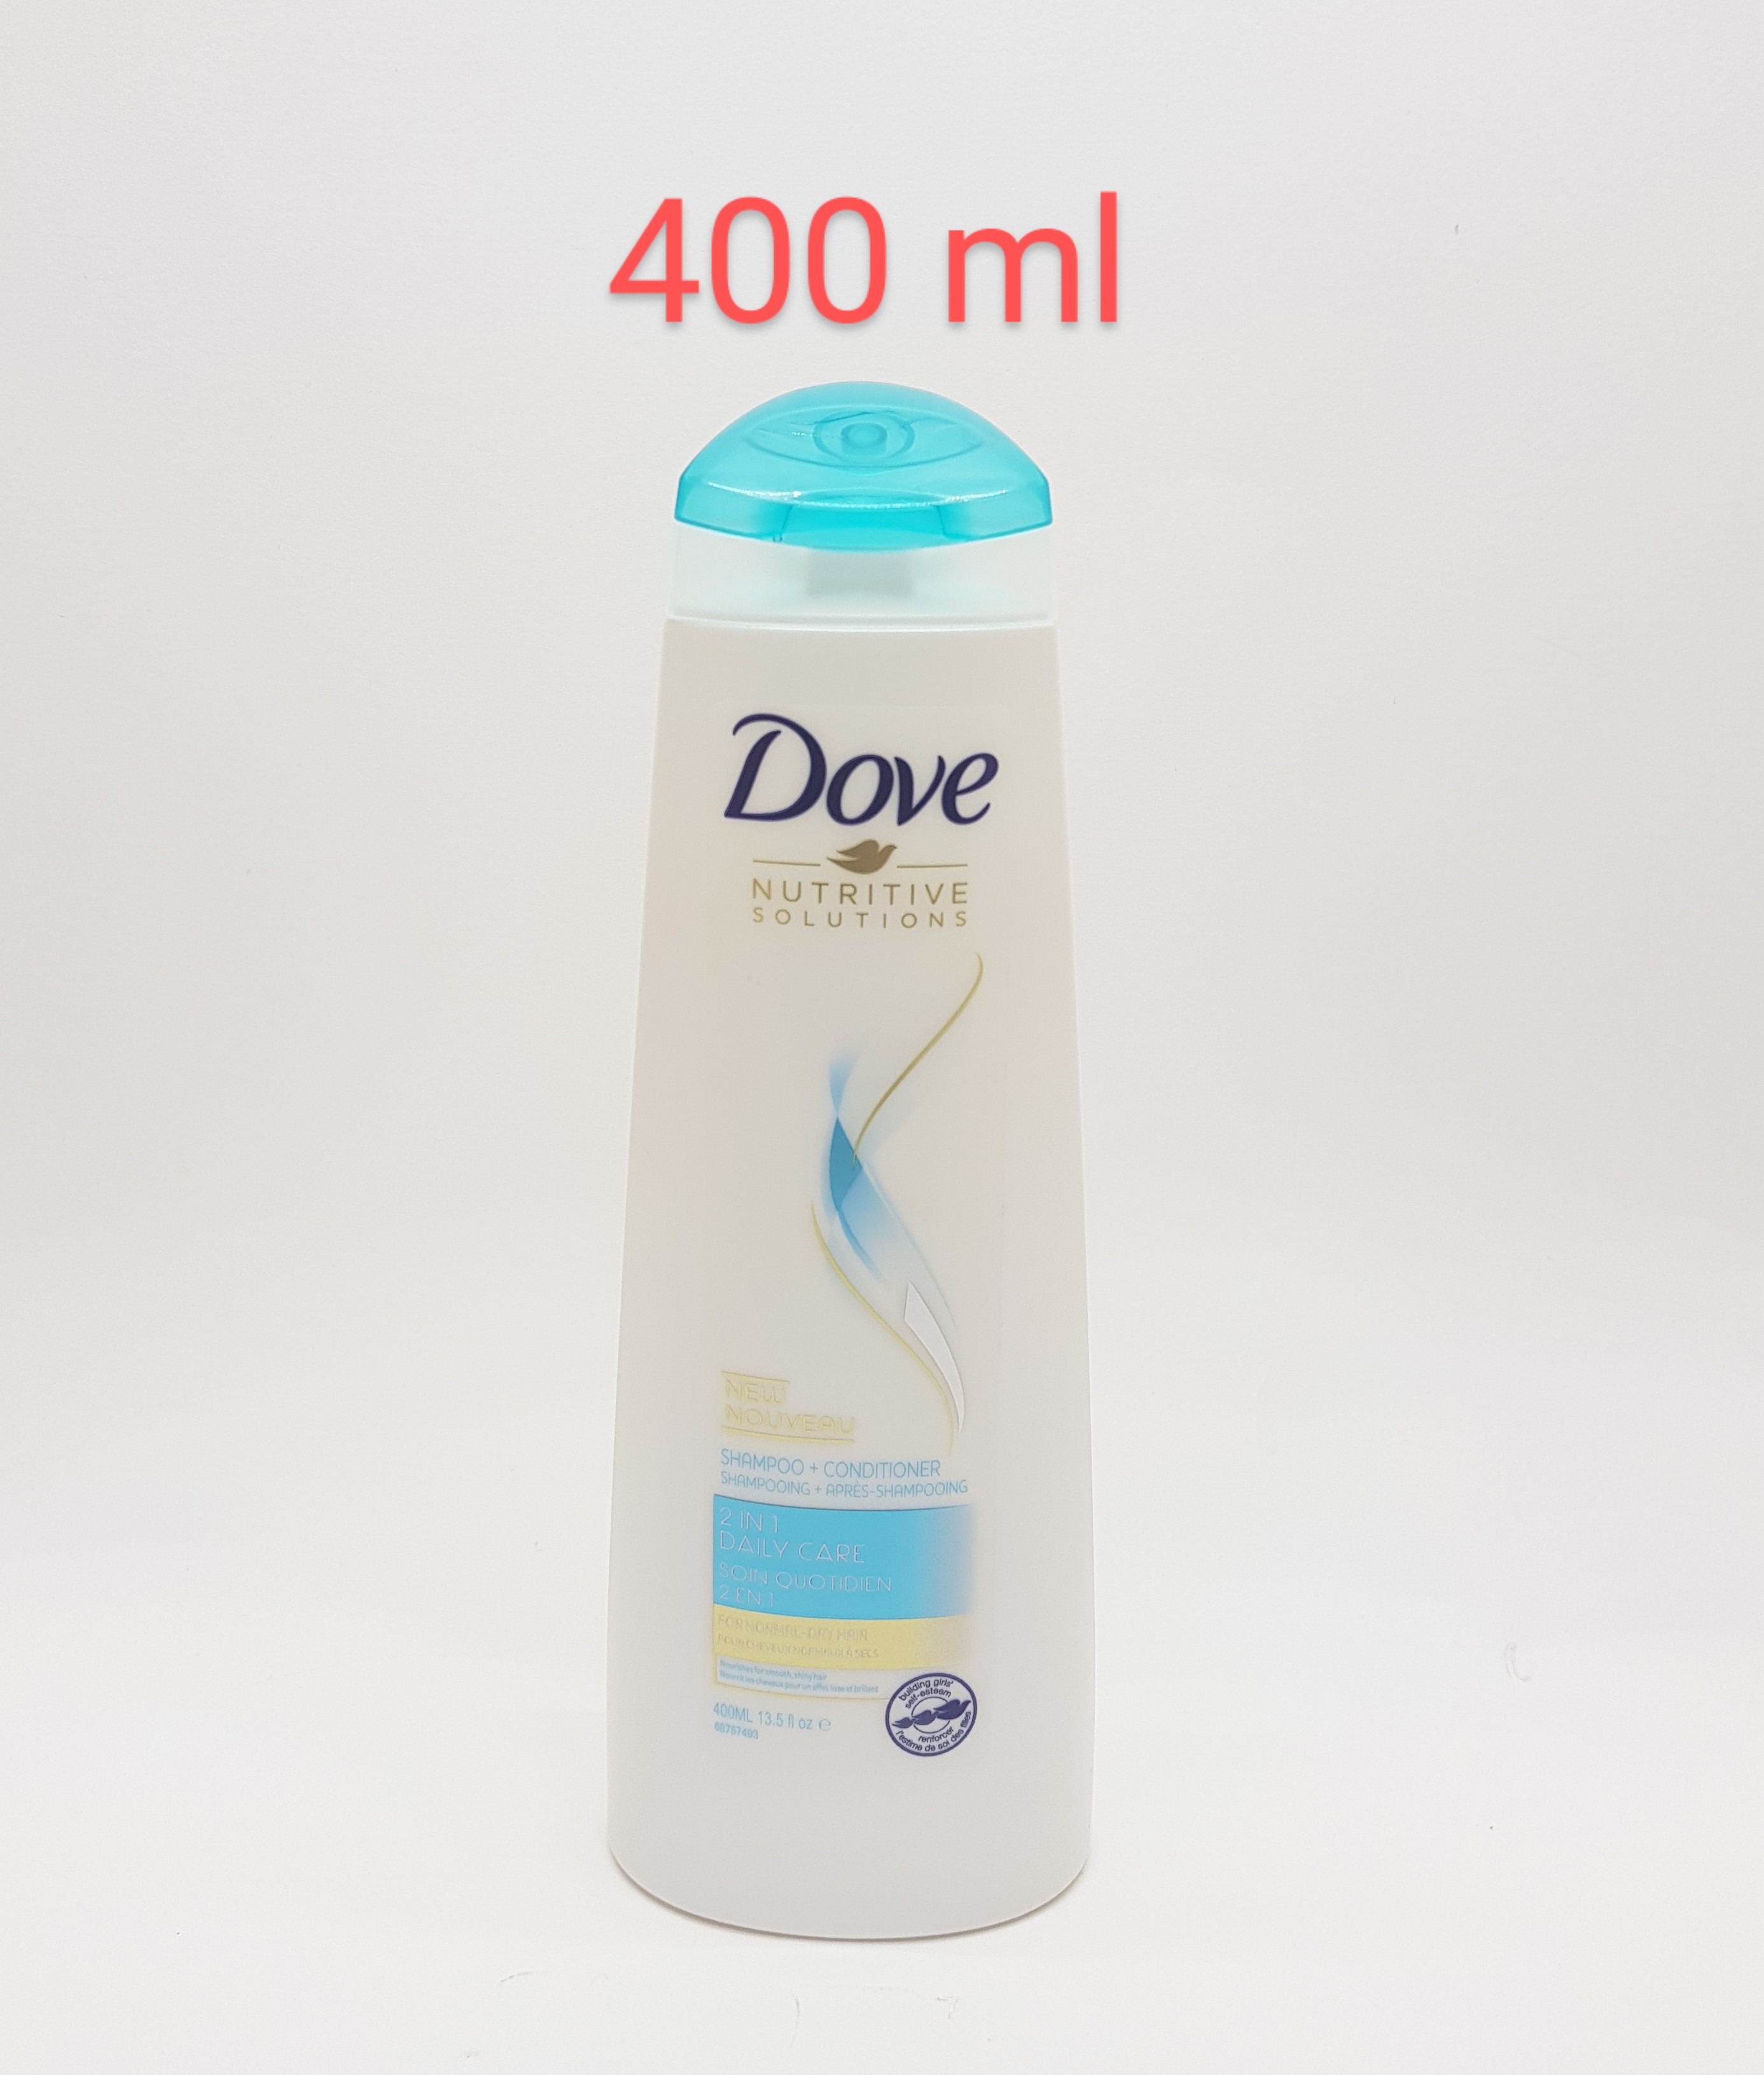 6 Pcs Dove Bundle Nutritive SolutIion Shampoo + Conditioner 2 In 1 Daily Care For Normal / Dry Hair 13.5 fl. oz. / (6X400 ml) (Cargo) 10097922